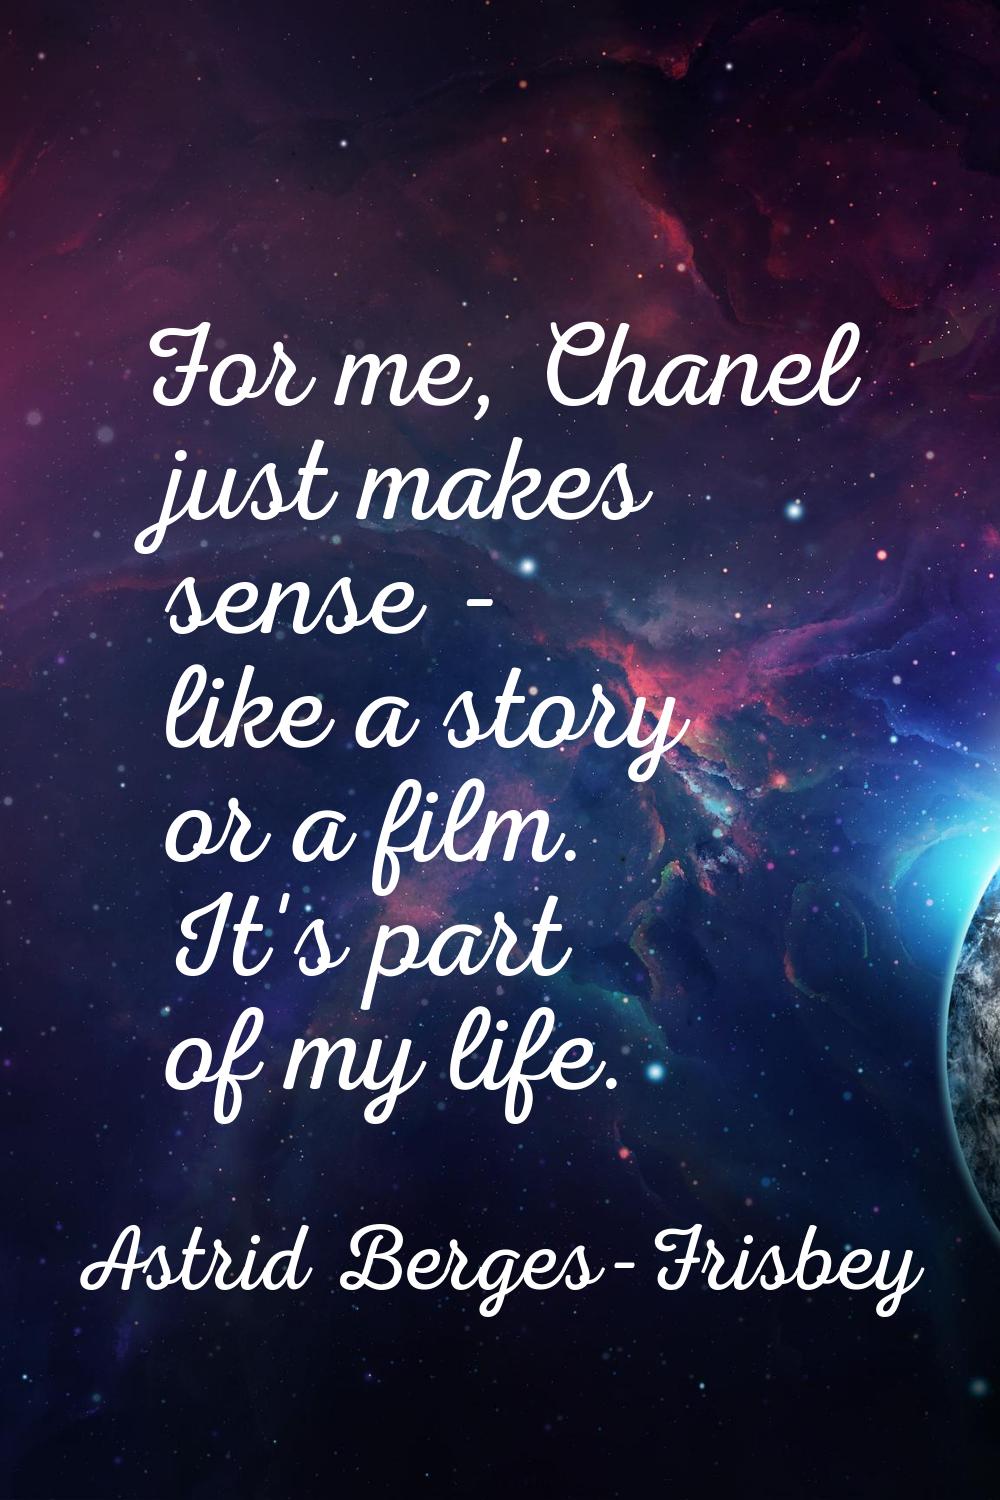 For me, Chanel just makes sense - like a story or a film. It's part of my life.